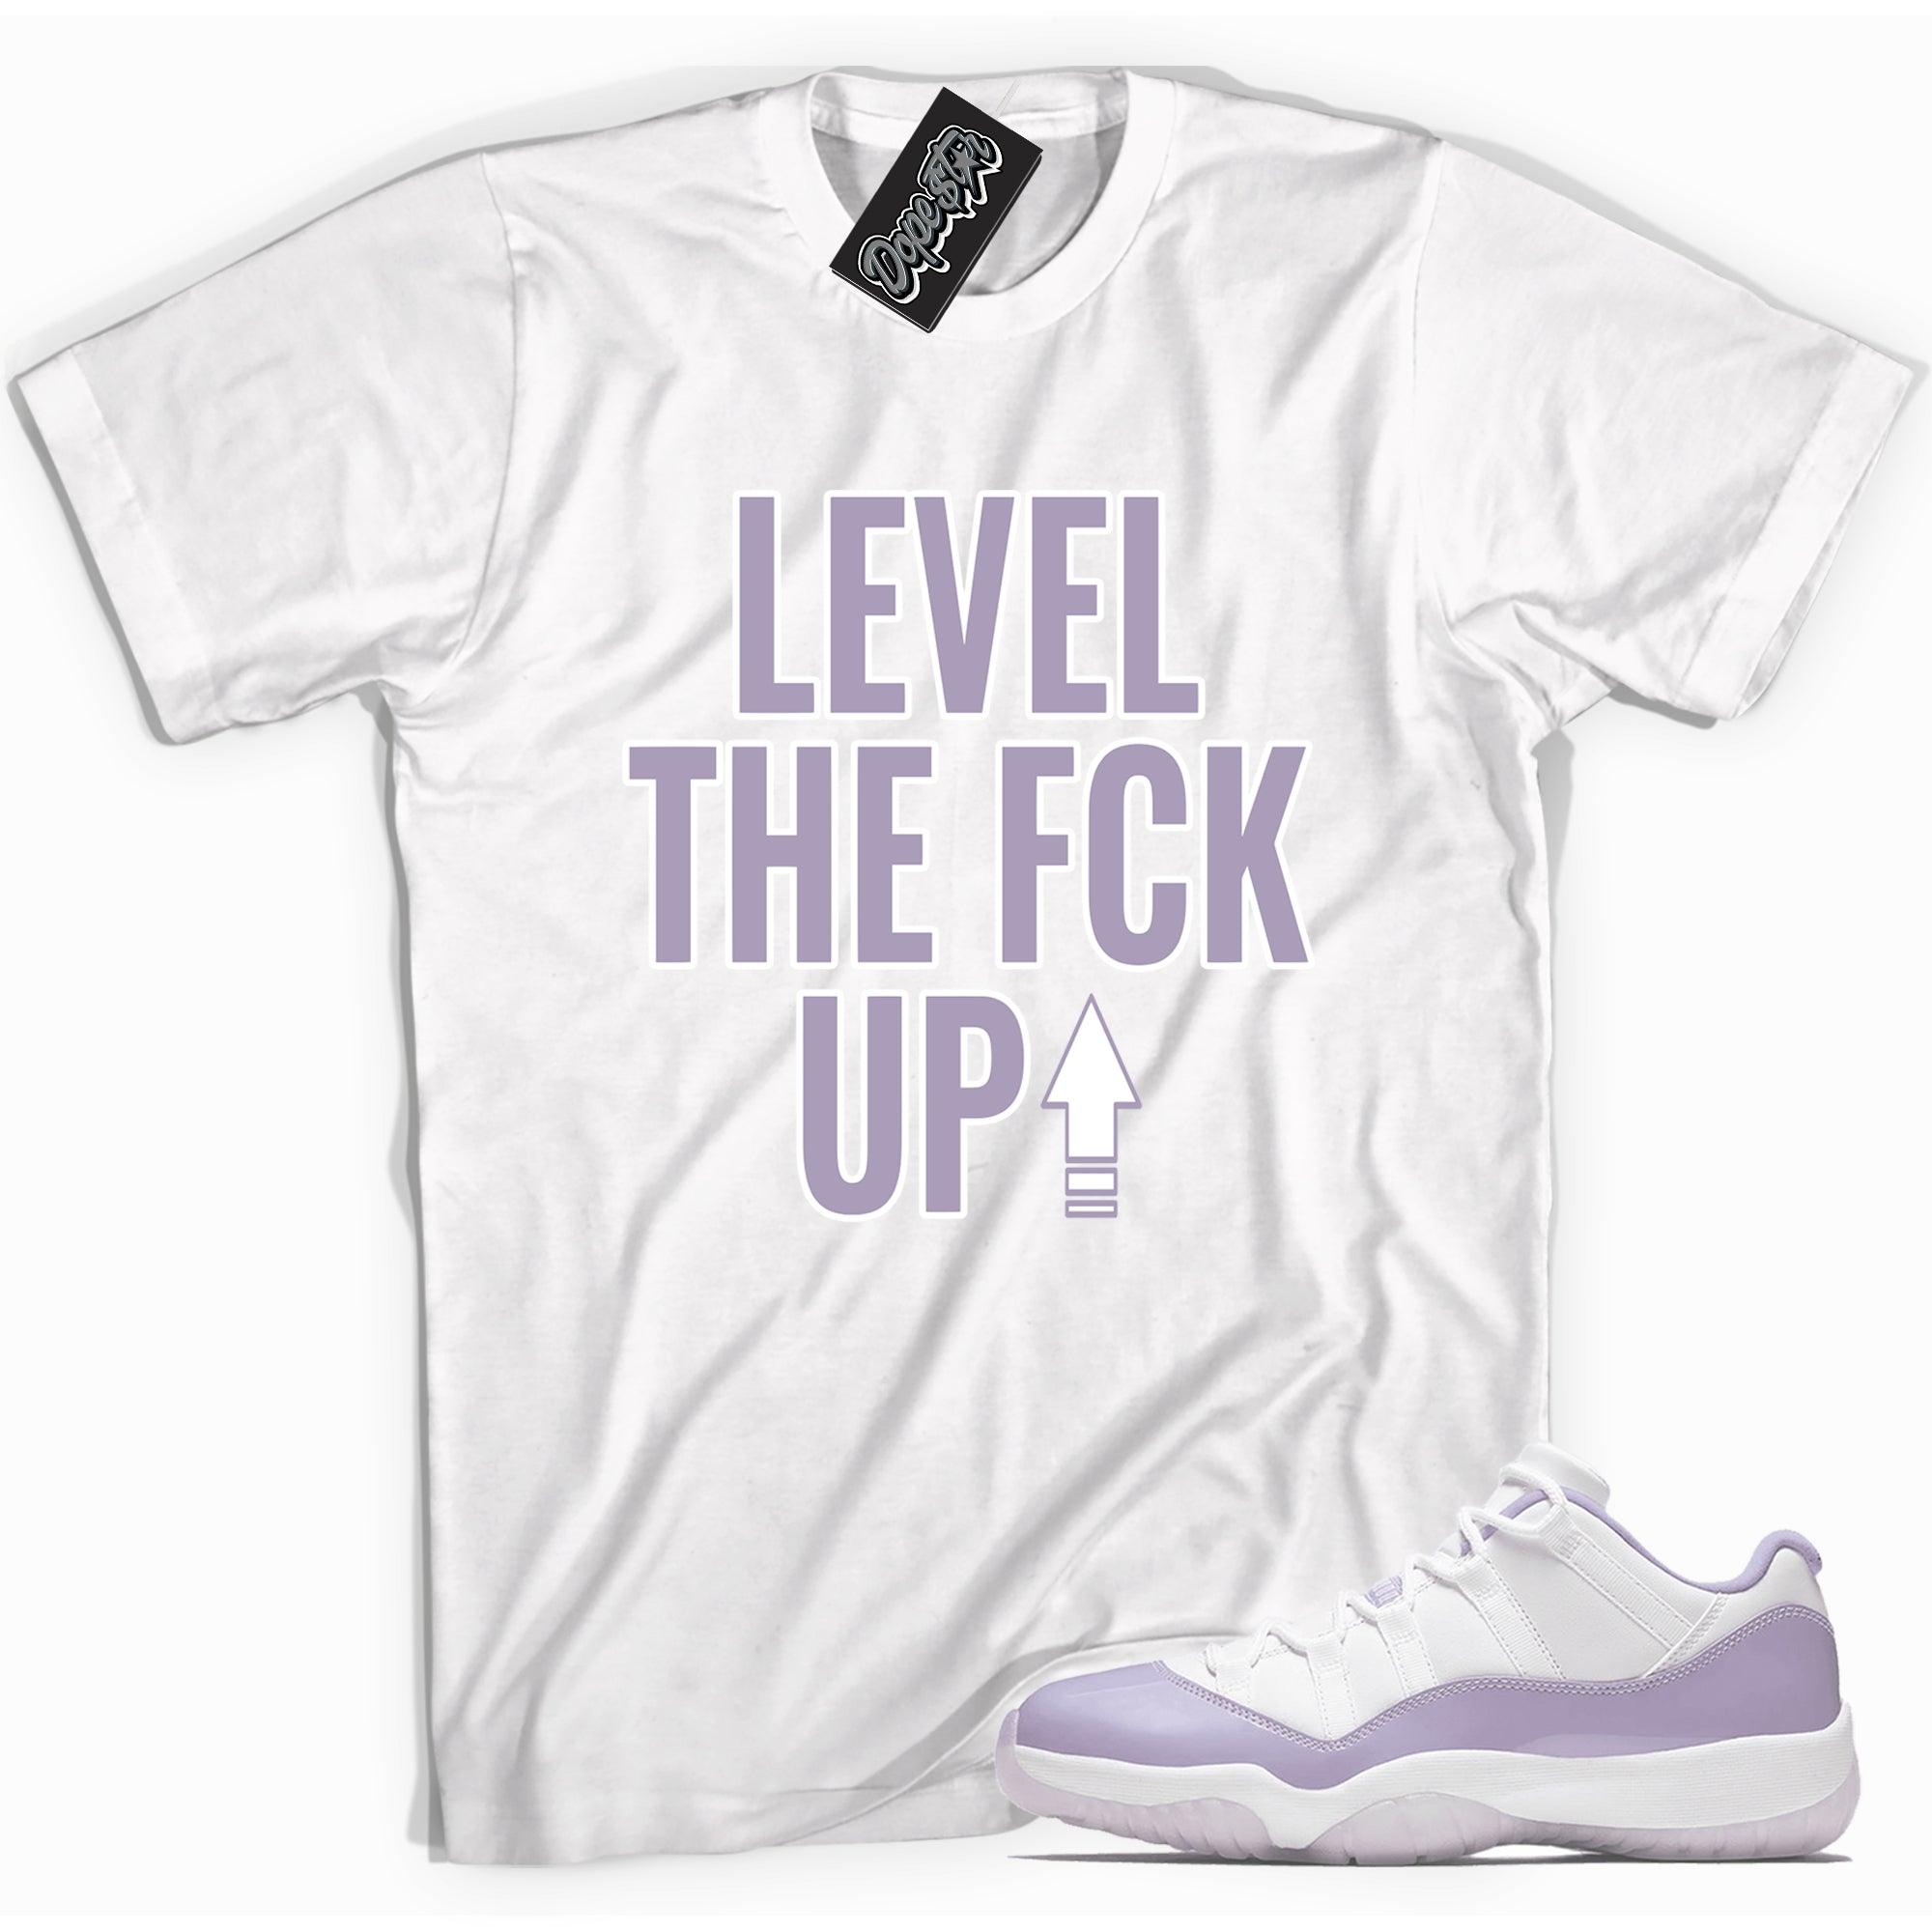 Cool white graphic tee with 'Level Up' print, that perfectly matches Air Jordan 11 Retro Low Pure violet sneakers.